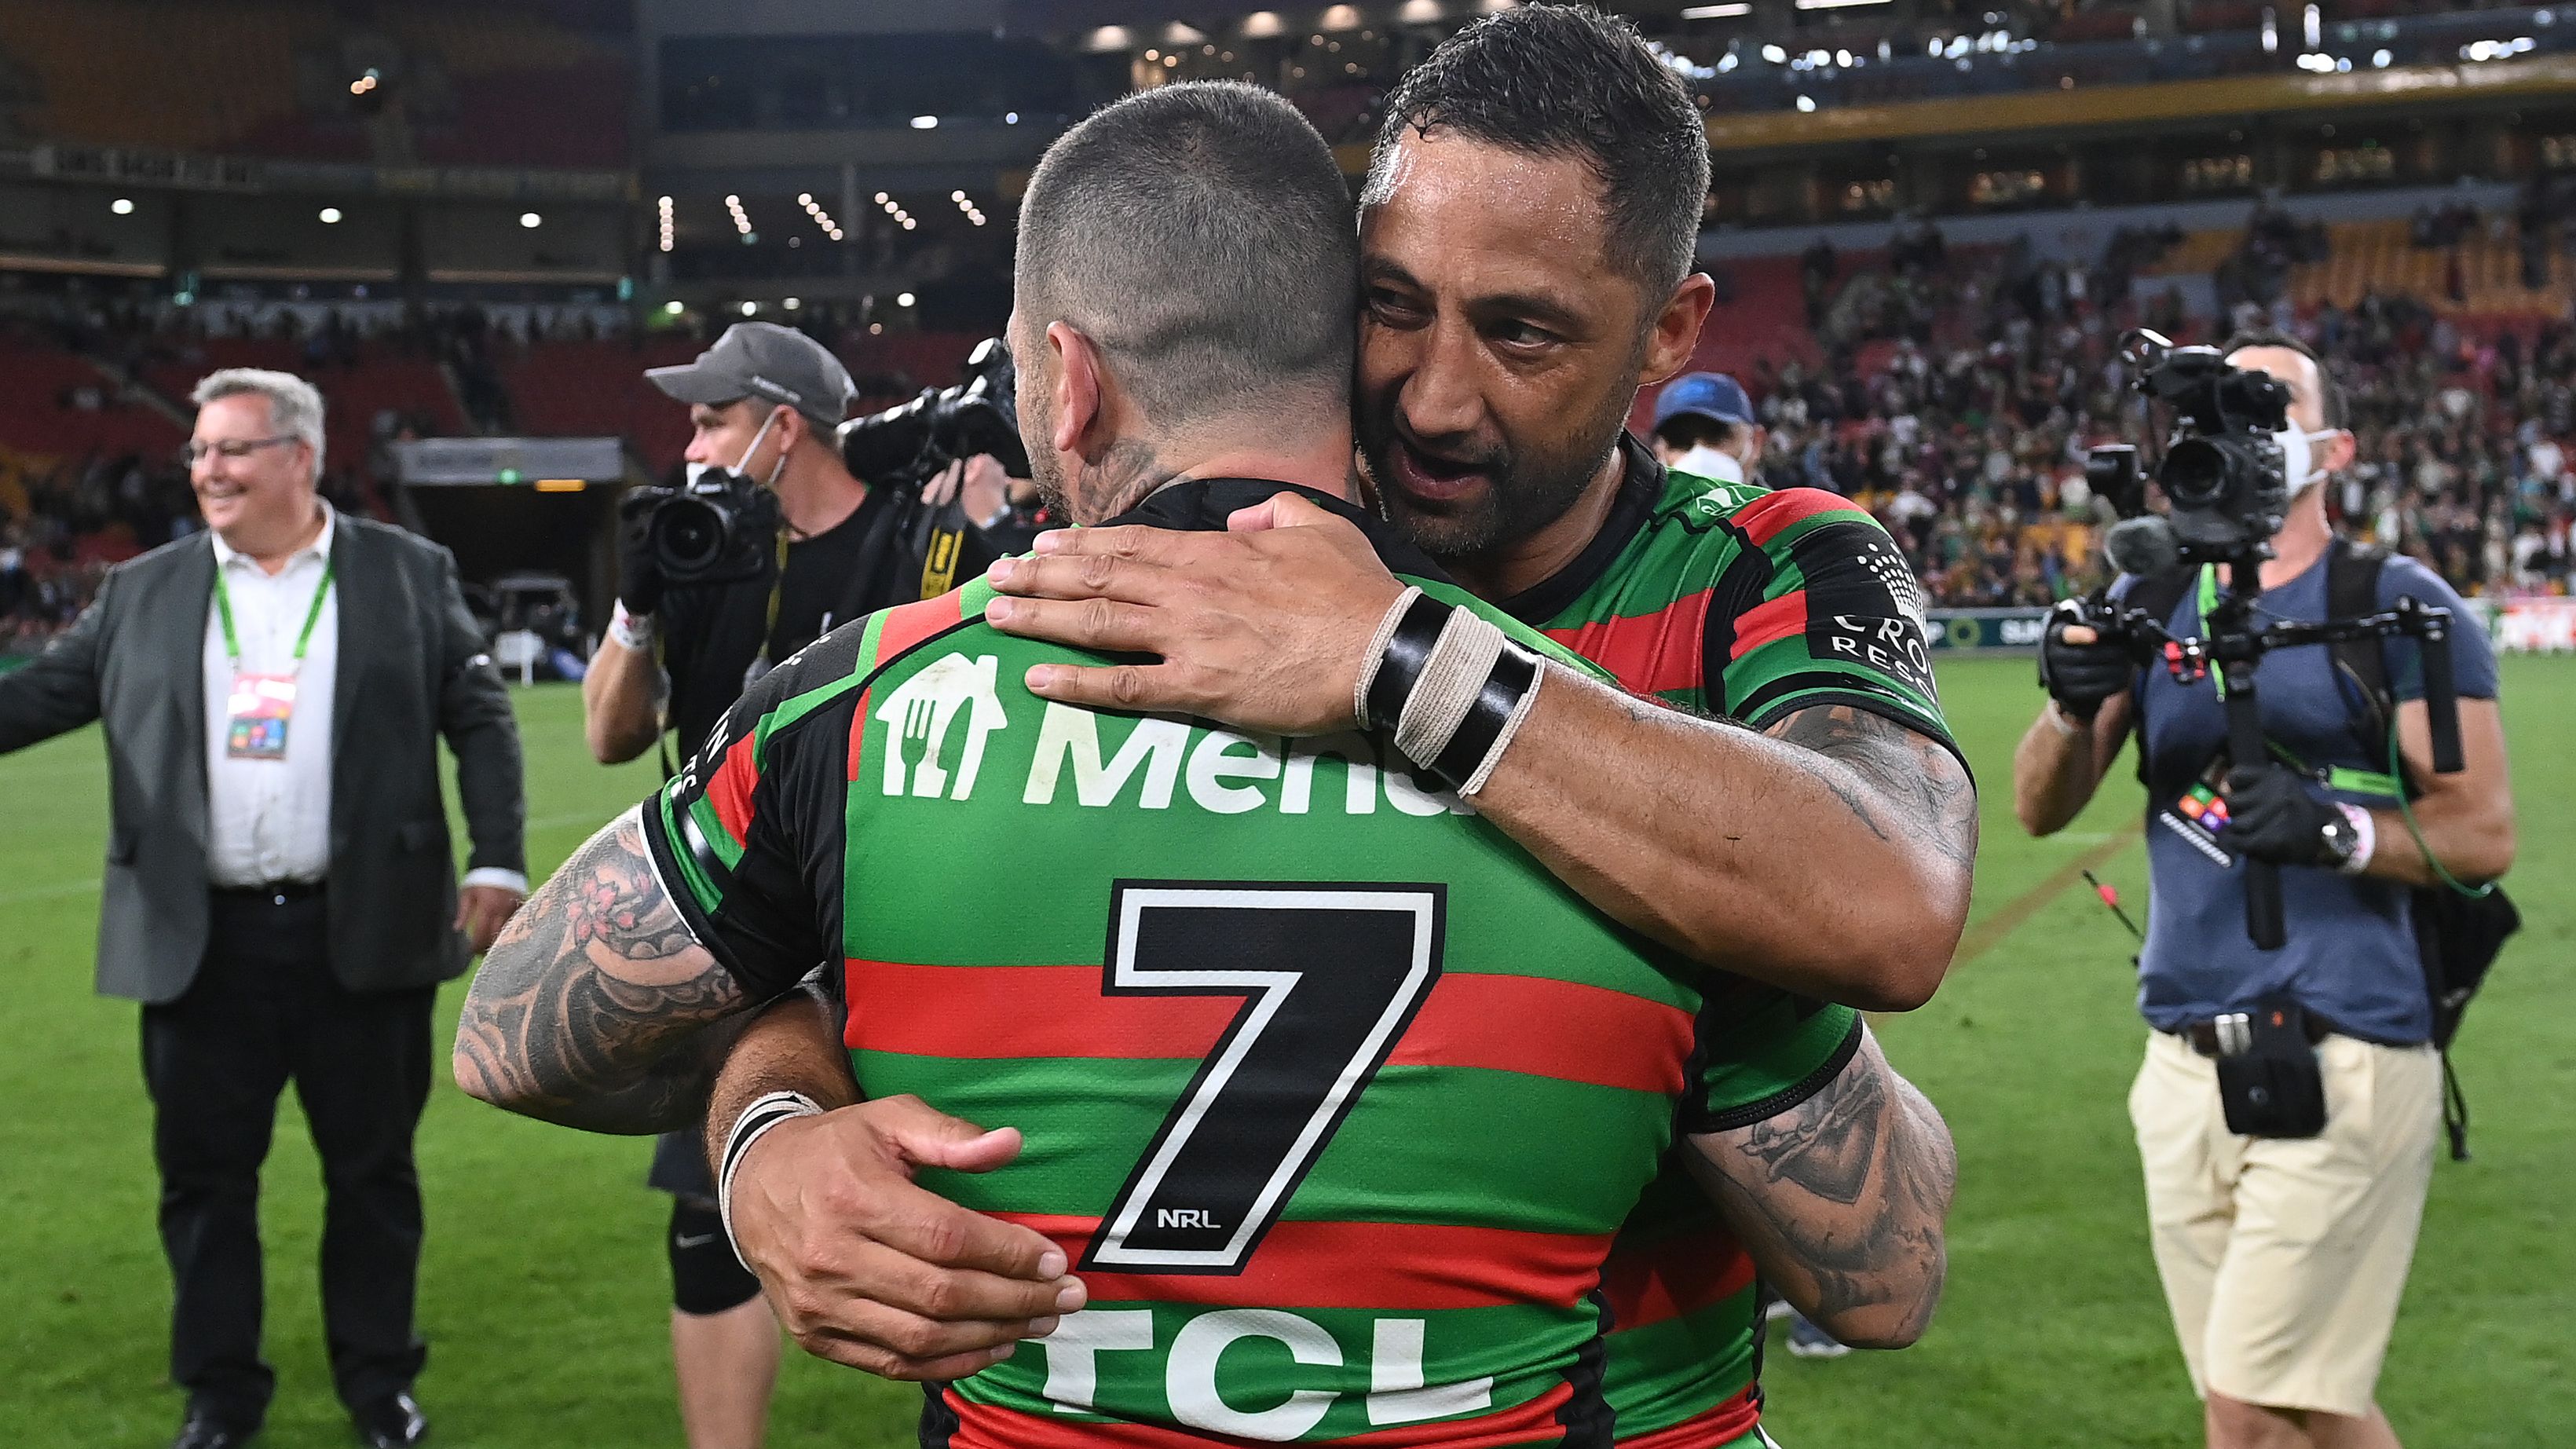 Benji Marshall reveals desire to play on to a 20th season in the NRL amid retirement talk